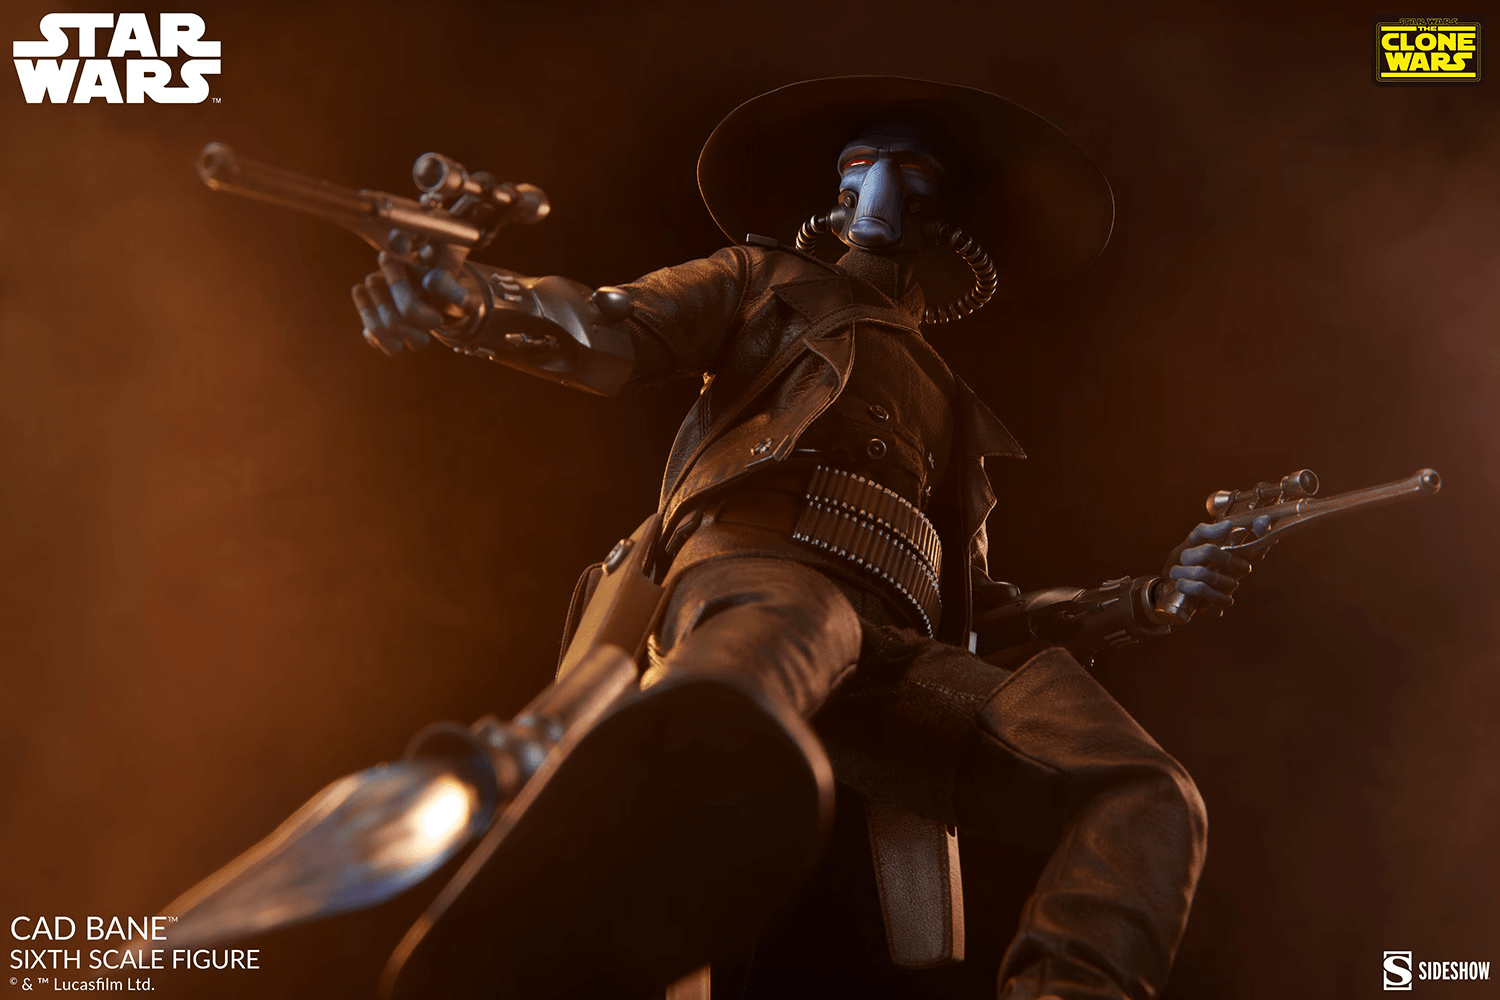 Star Wars - Cad Bane 1:6 Figure Statue by Sideshow Collectibles | Titan Pop Culture